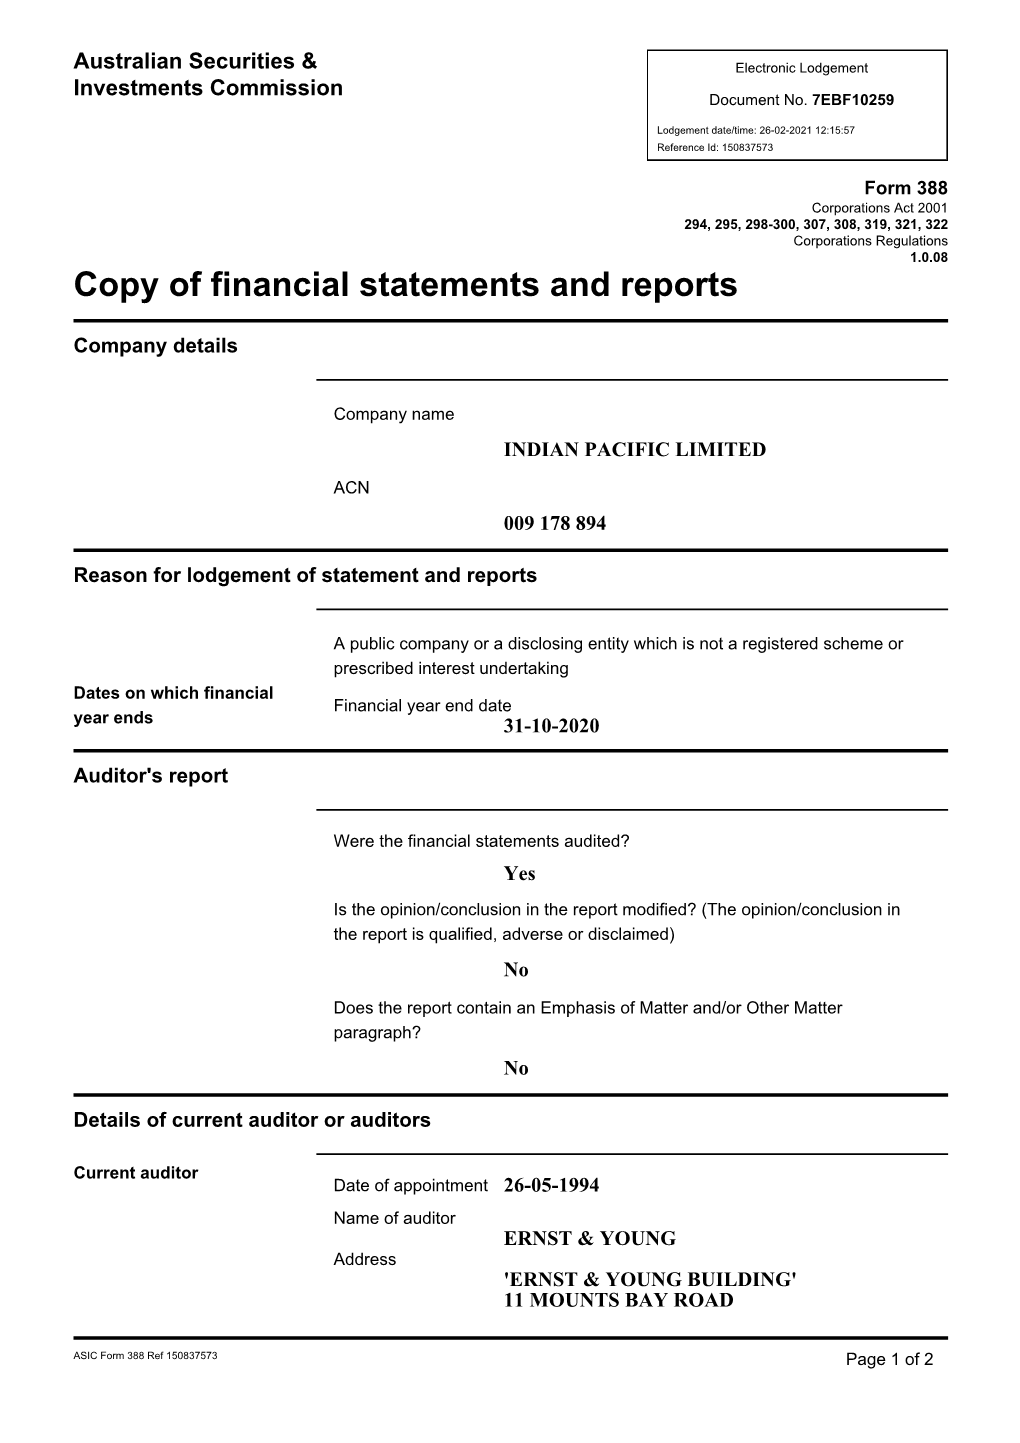 Copy of Financial Statements and Reports